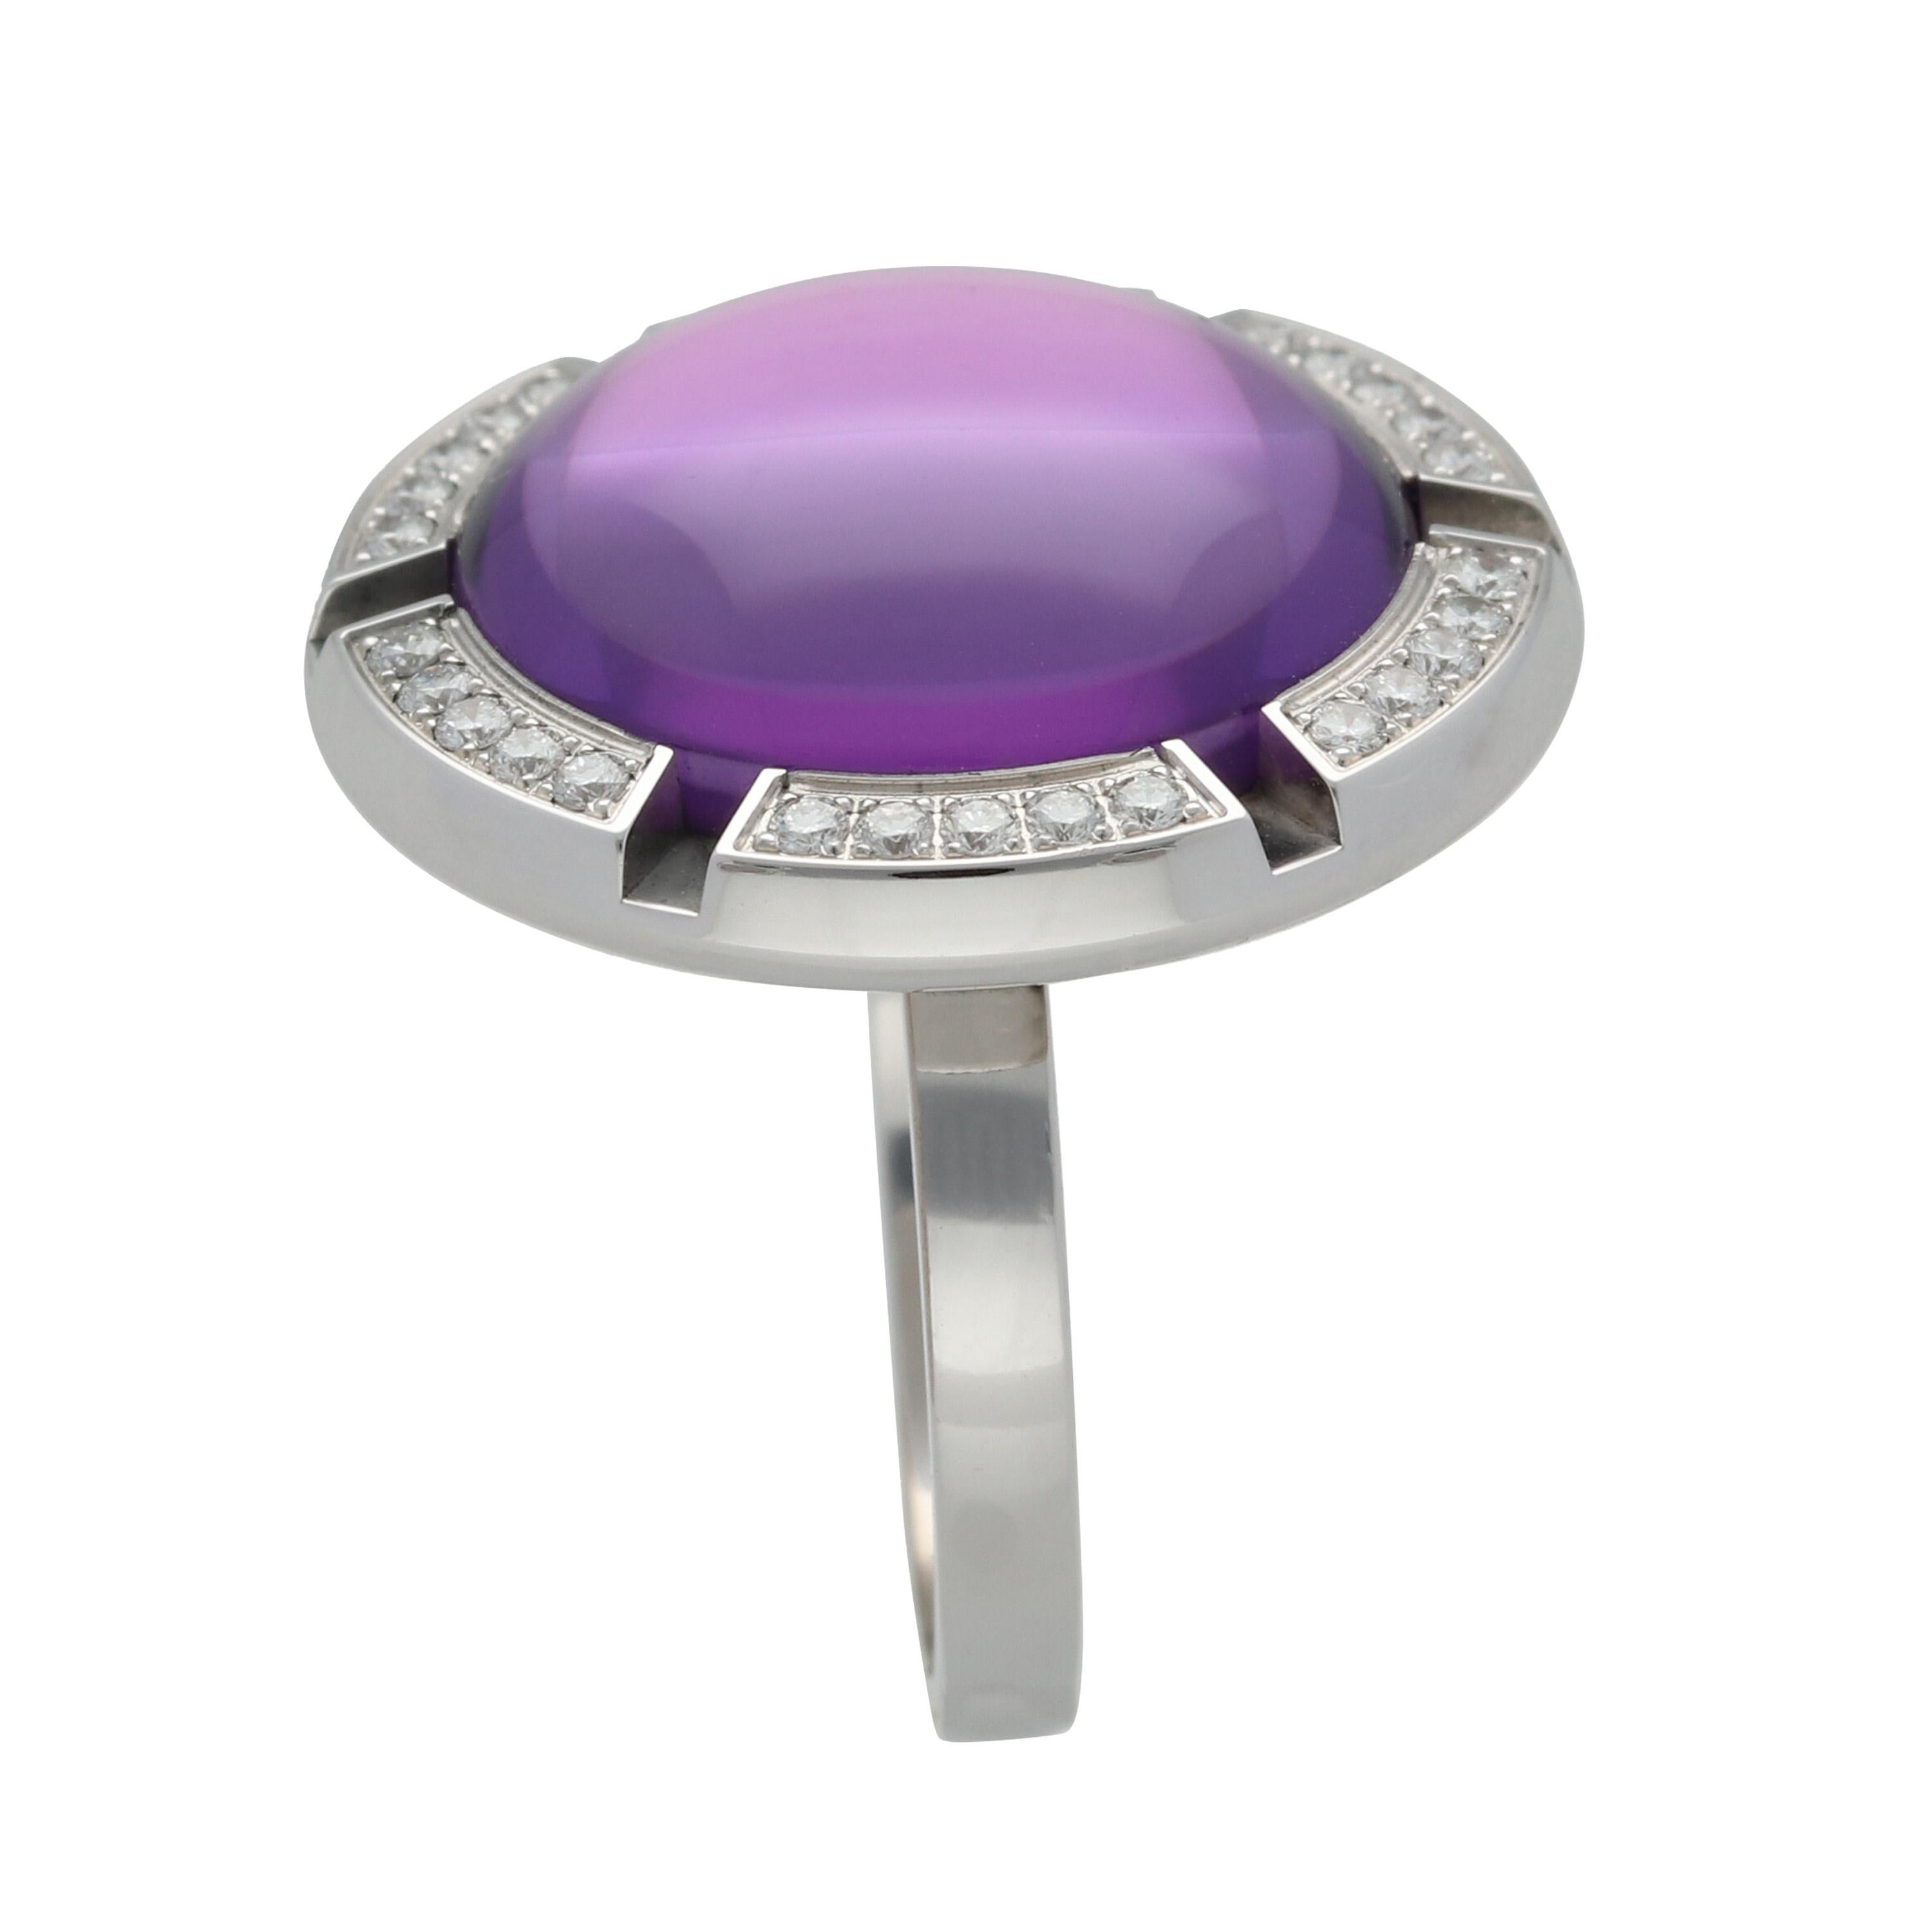 A 750 white gold Chaumet  'Class One Croisière' XL model cocktail ring,  set with a cabochon cut amethyst surrounded by 30 brilliant cut diamonds. 

RING SIZE US 6.5 - 53 mm

Components:
1  Central Amethyst 
Total  Diamonds quantity - 30 
18K white